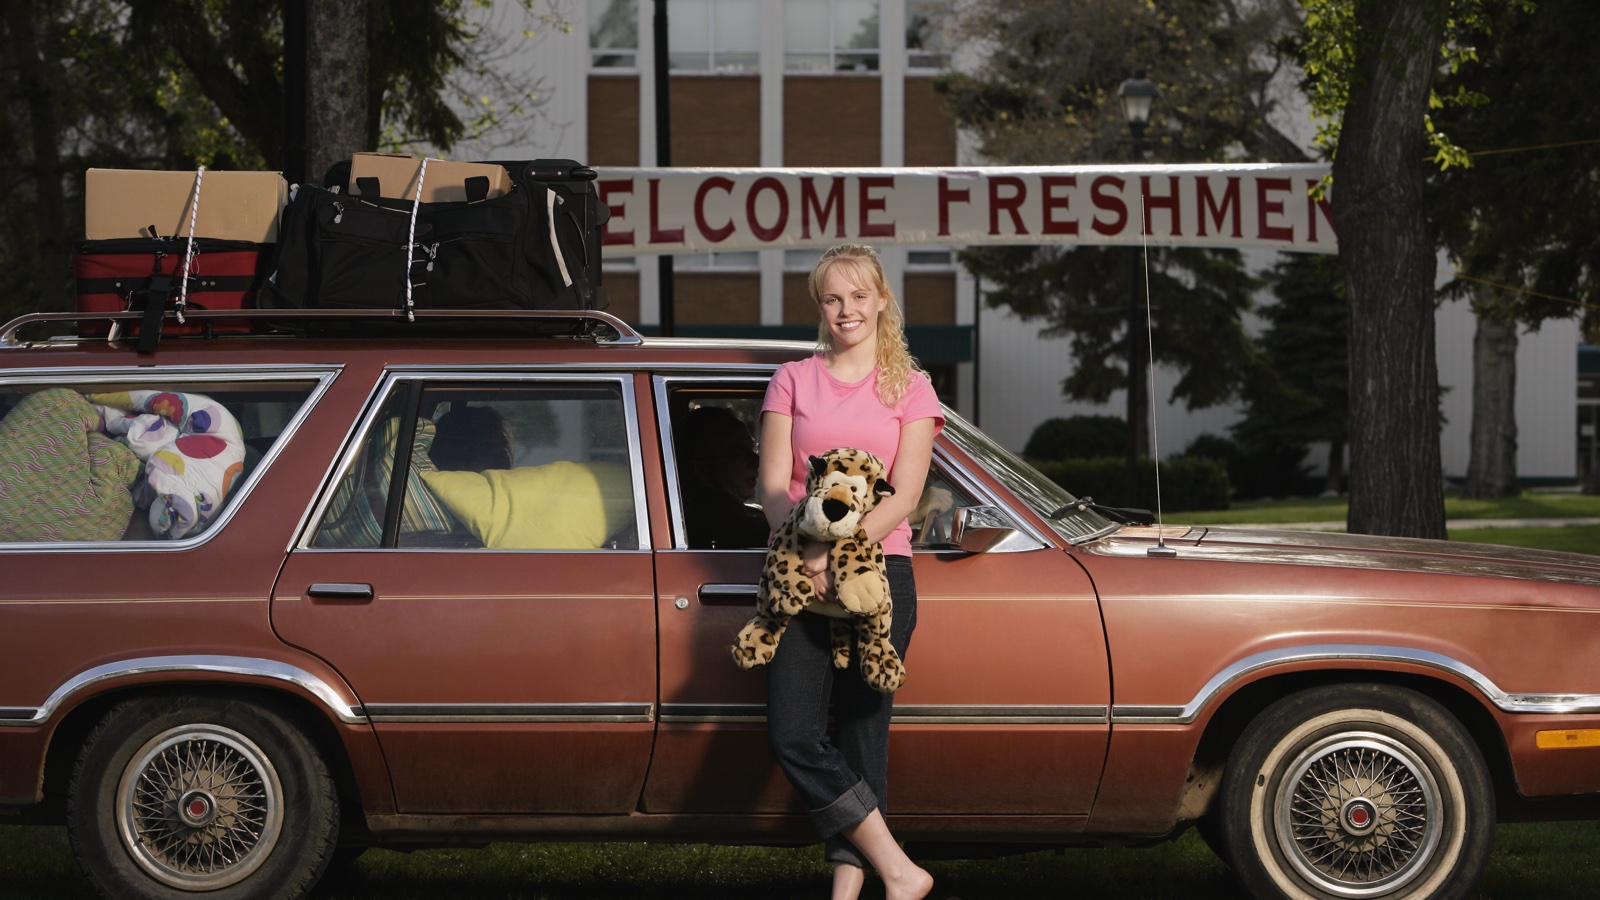 Checklist: What to Pack for College Freshman Year